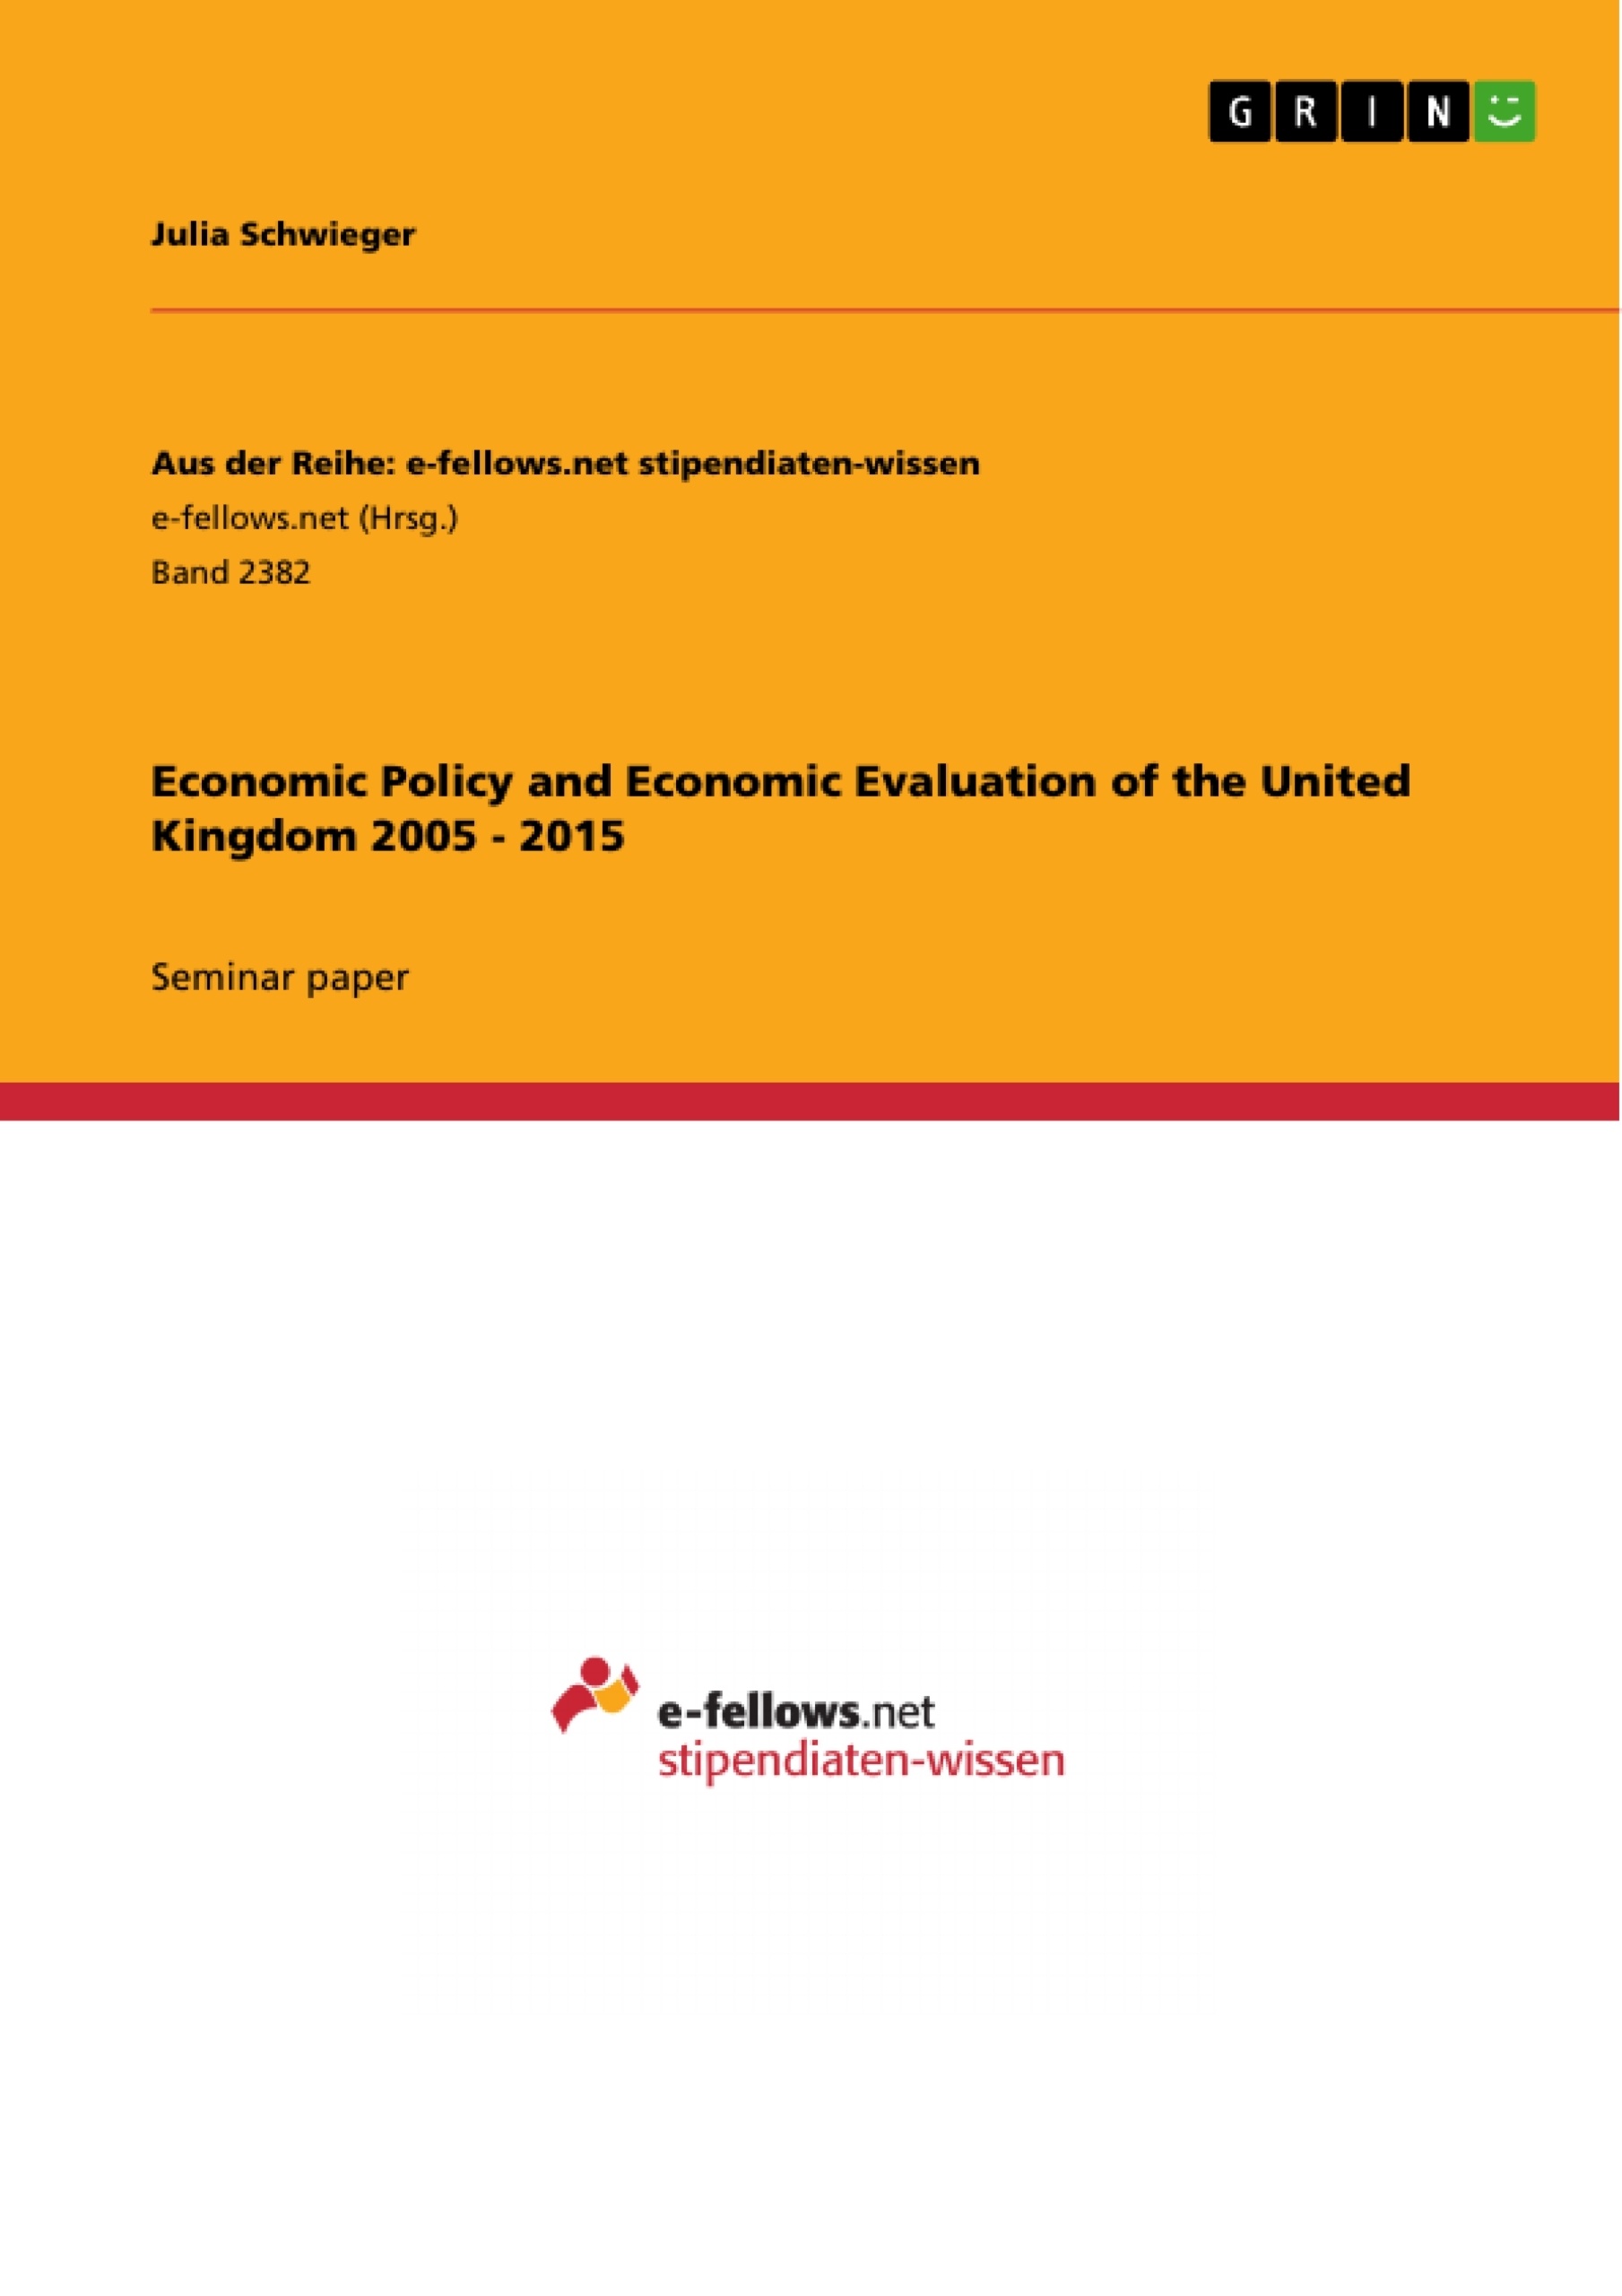 Title: Economic Policy and Economic Evaluation of the United Kingdom 2005 - 2015